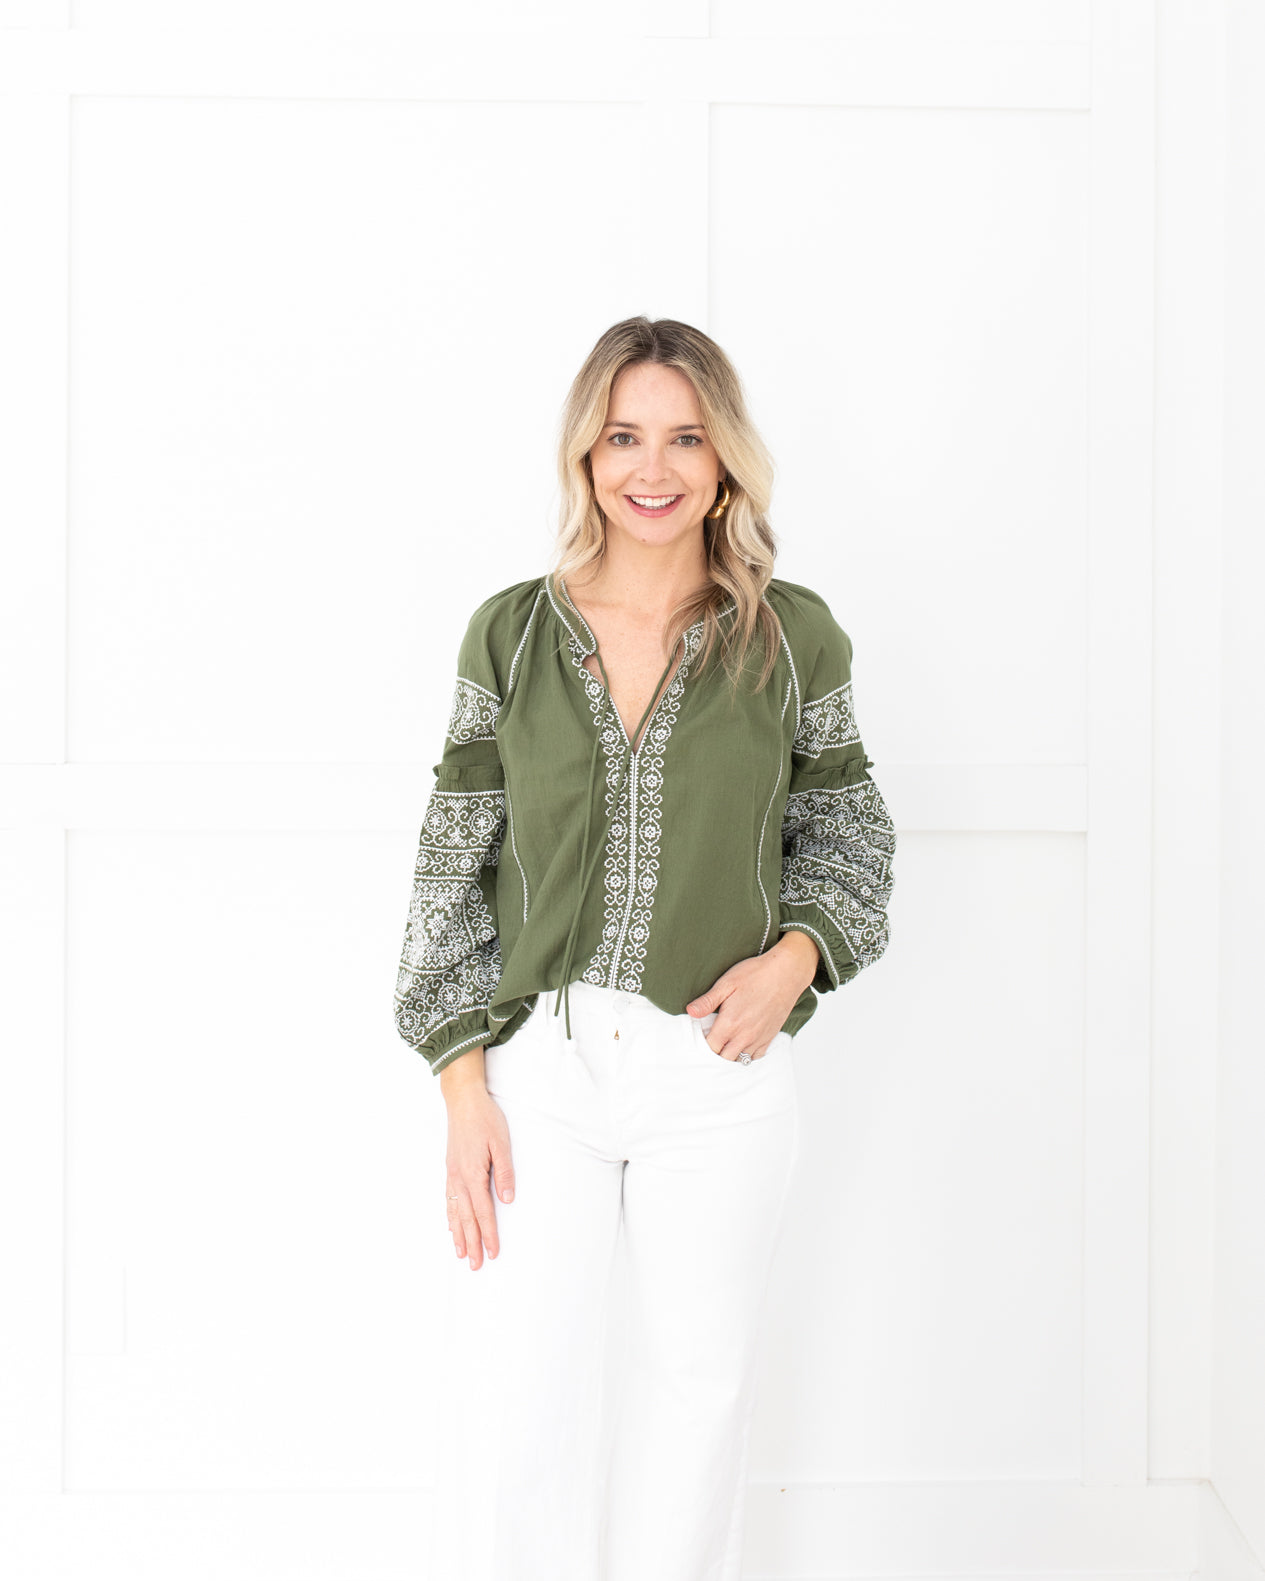 Olive with White Embroidery Blouse with Balloon Sleeves